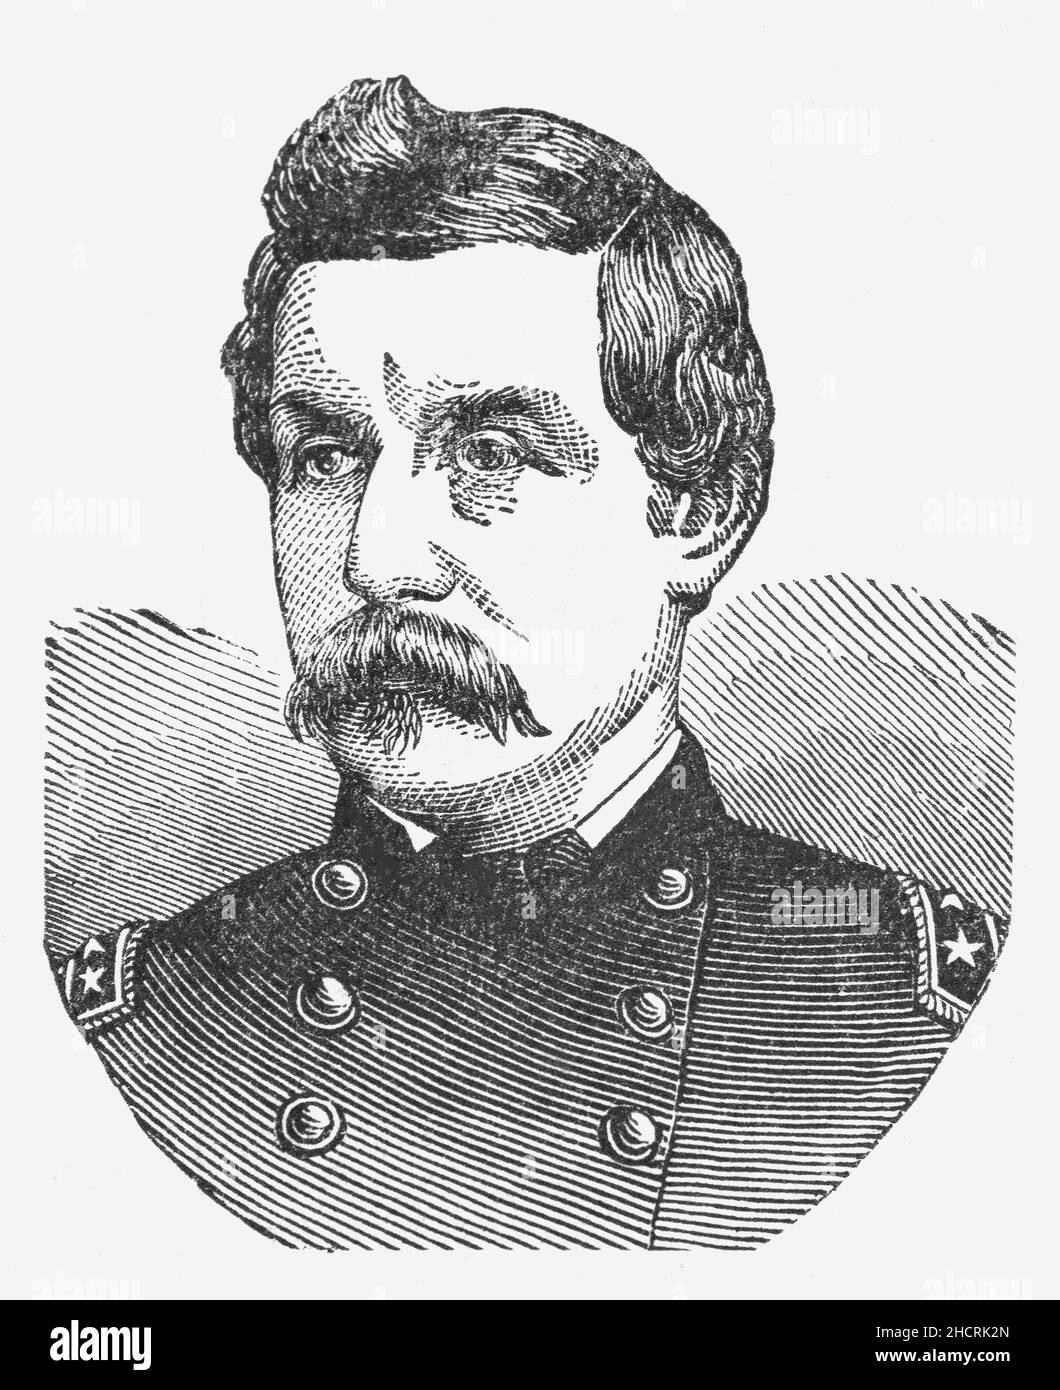 A late 19th Century portrait of George Brinton McClellan (1826-1885), an American soldier, Civil War Union general and politician who served as the 24th governor of New Jersey. McClellan served with distinction during the Mexican–American War (1846–1848), and later at the outbreak of the American Civil War (1861–1865). Early in the conflict, McClellan was appointed to the rank of major general and raised a well-trained and disciplined army, which would become the Army of the Potomac in the Eastern Theater, later as Commanding General of the United States Army of the Union Army. Stock Photo